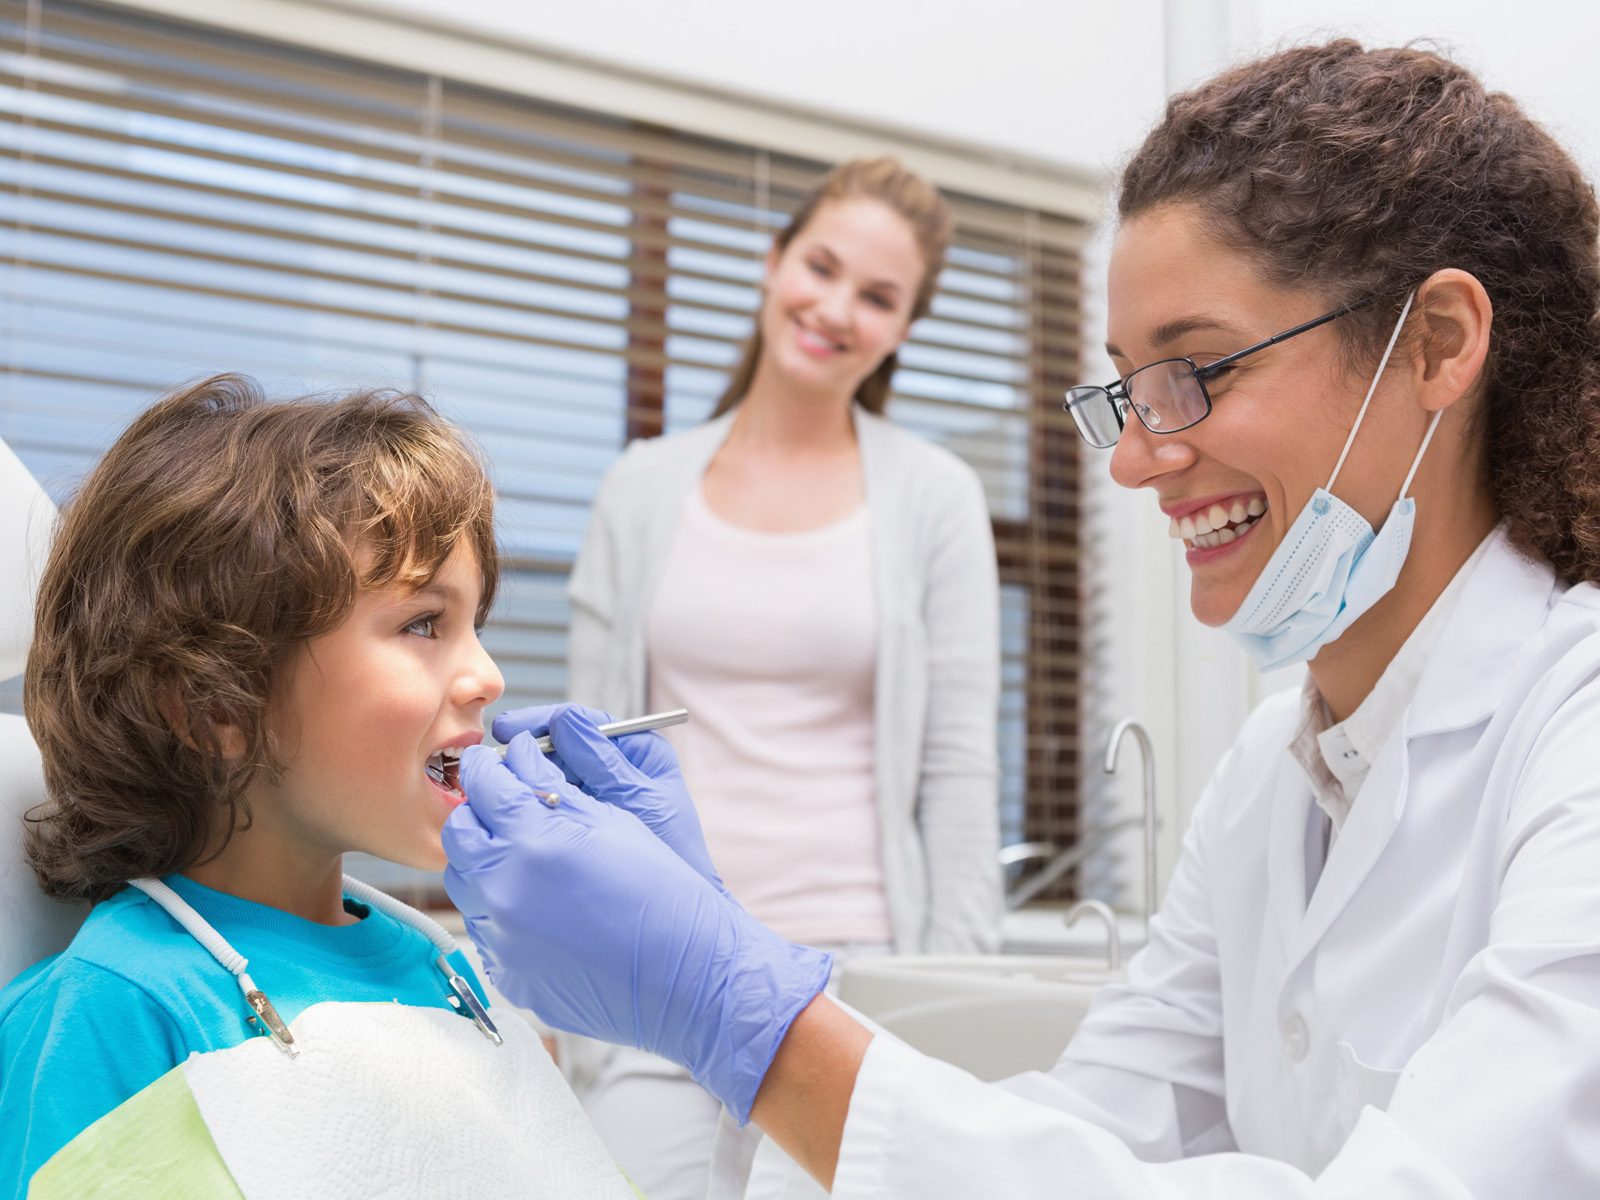 Tips for finding the right pediatric dentist